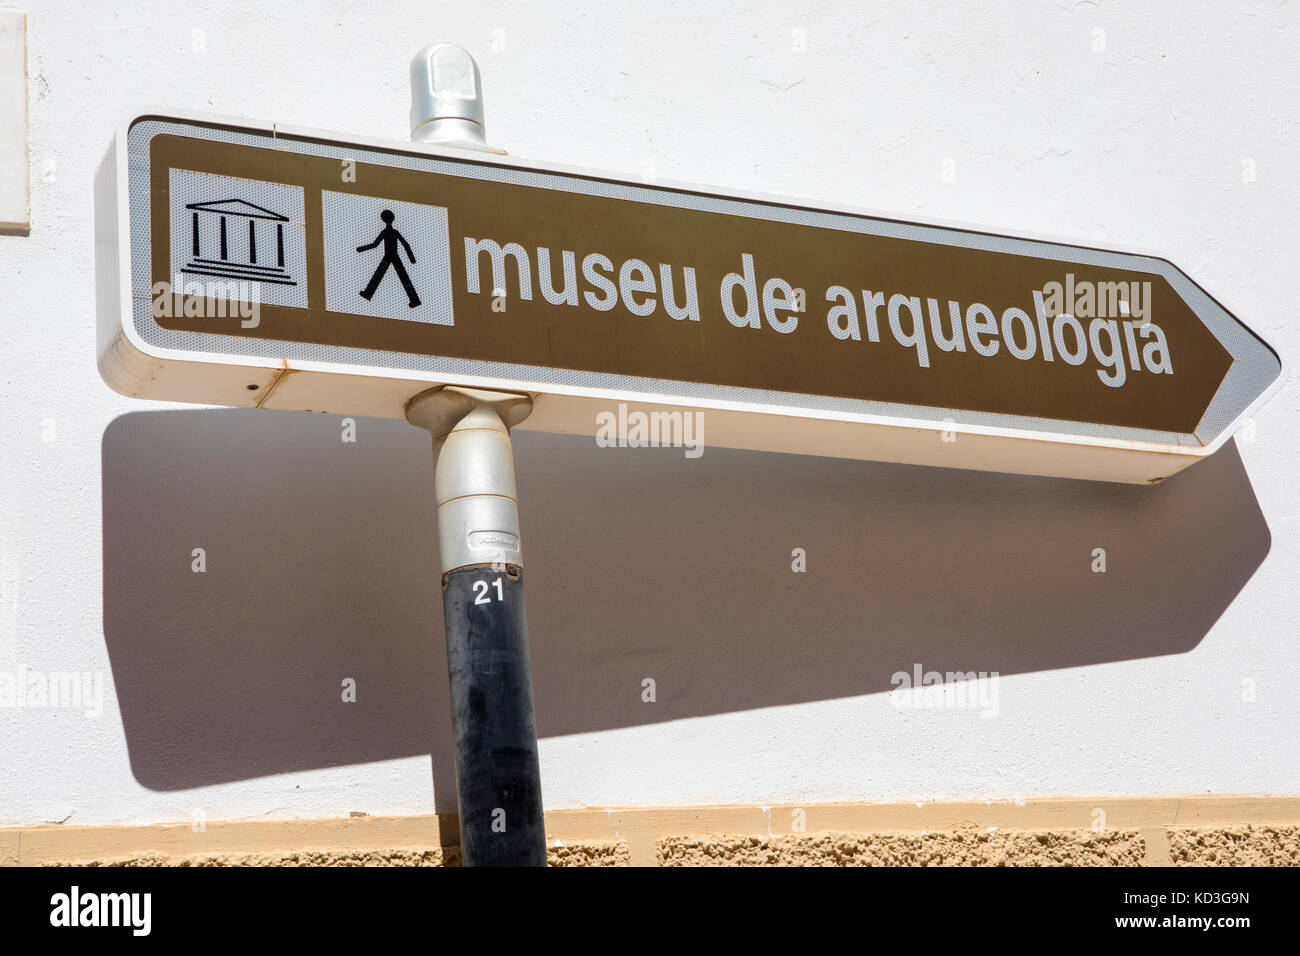 A directional sign for the Museu de Arqueologia, Silves Municipal Museum of Archeology in English, located in the historic town of Silves in Portugal. Stock Photo